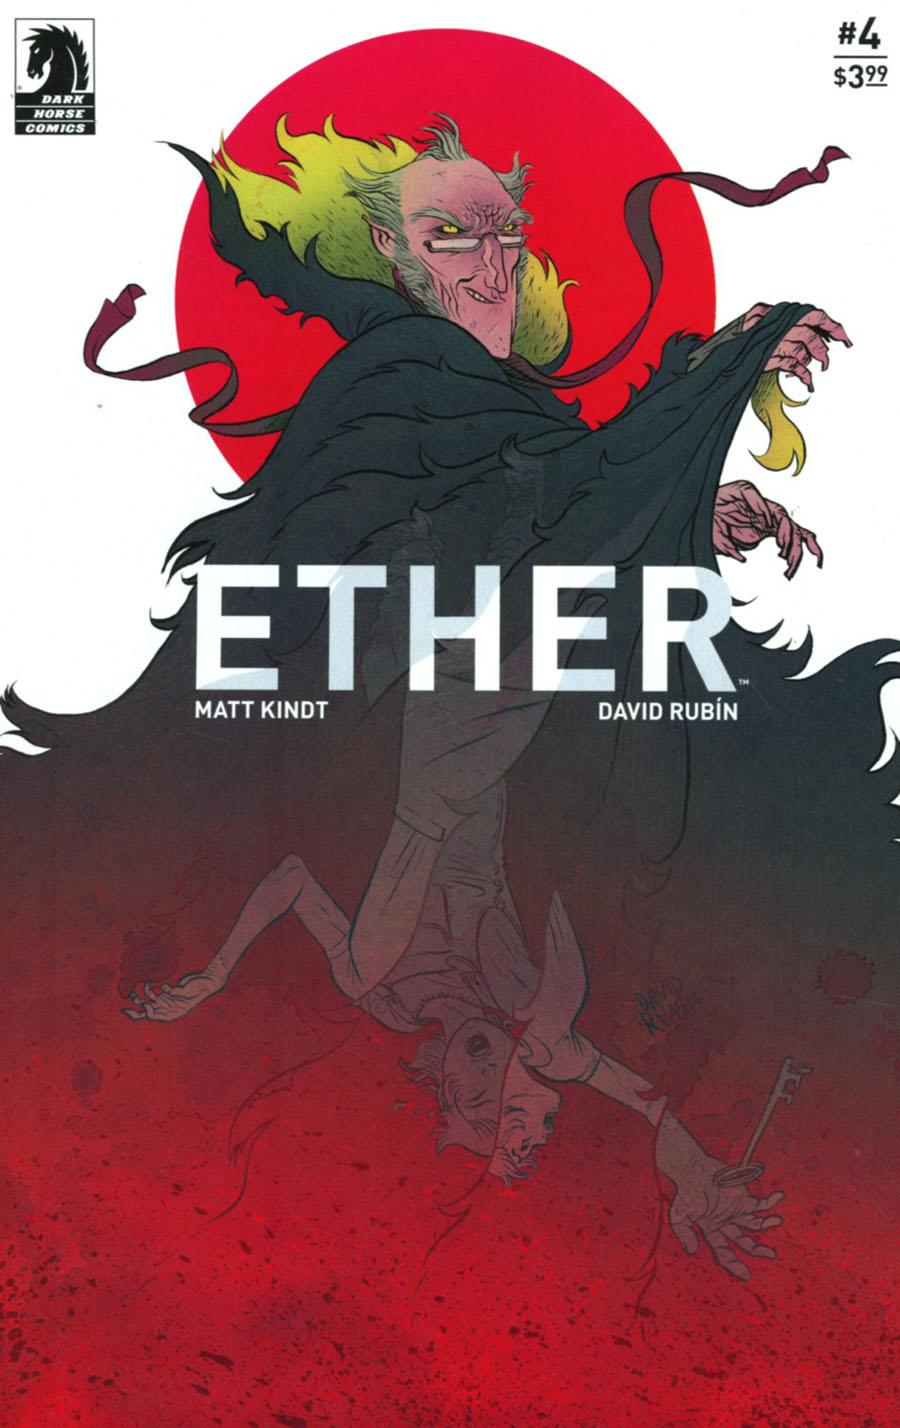 Ether Vol. 1 #4